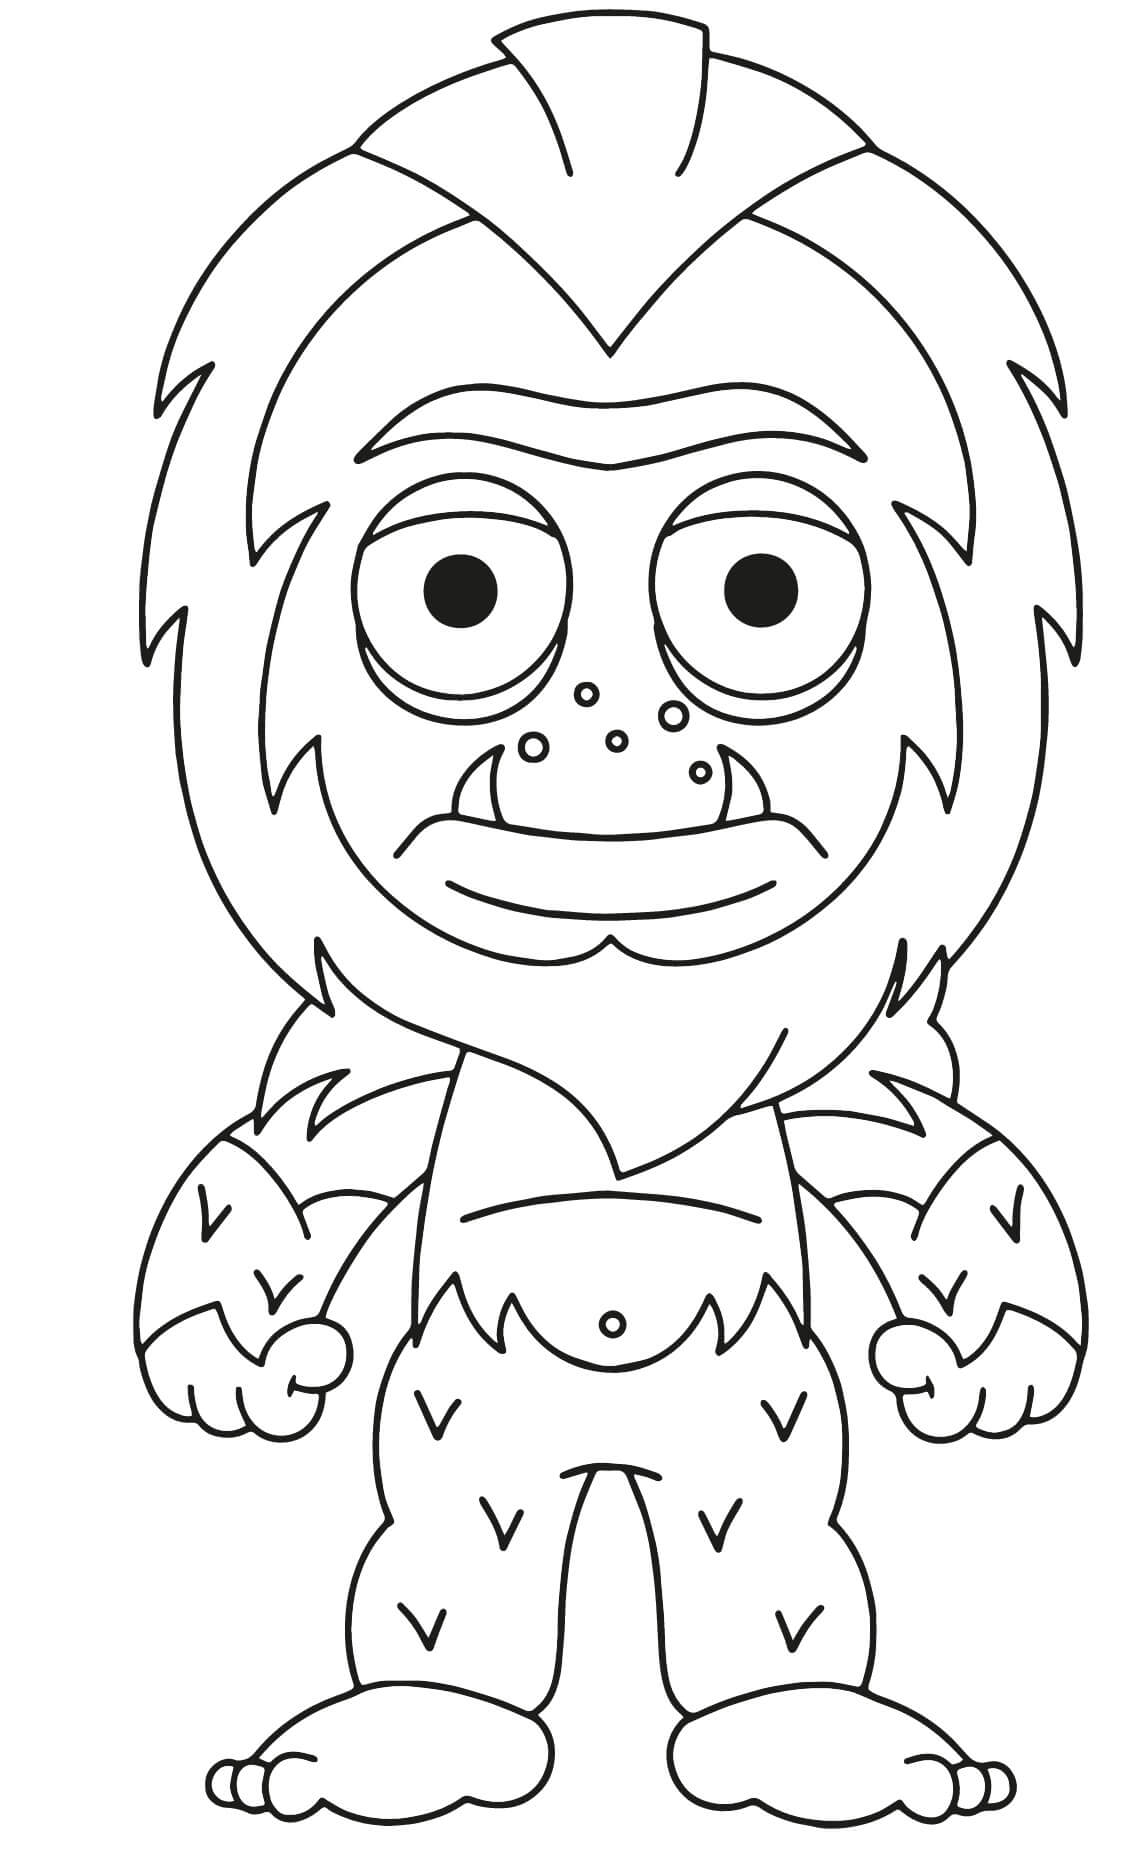 Trog Coloring Page